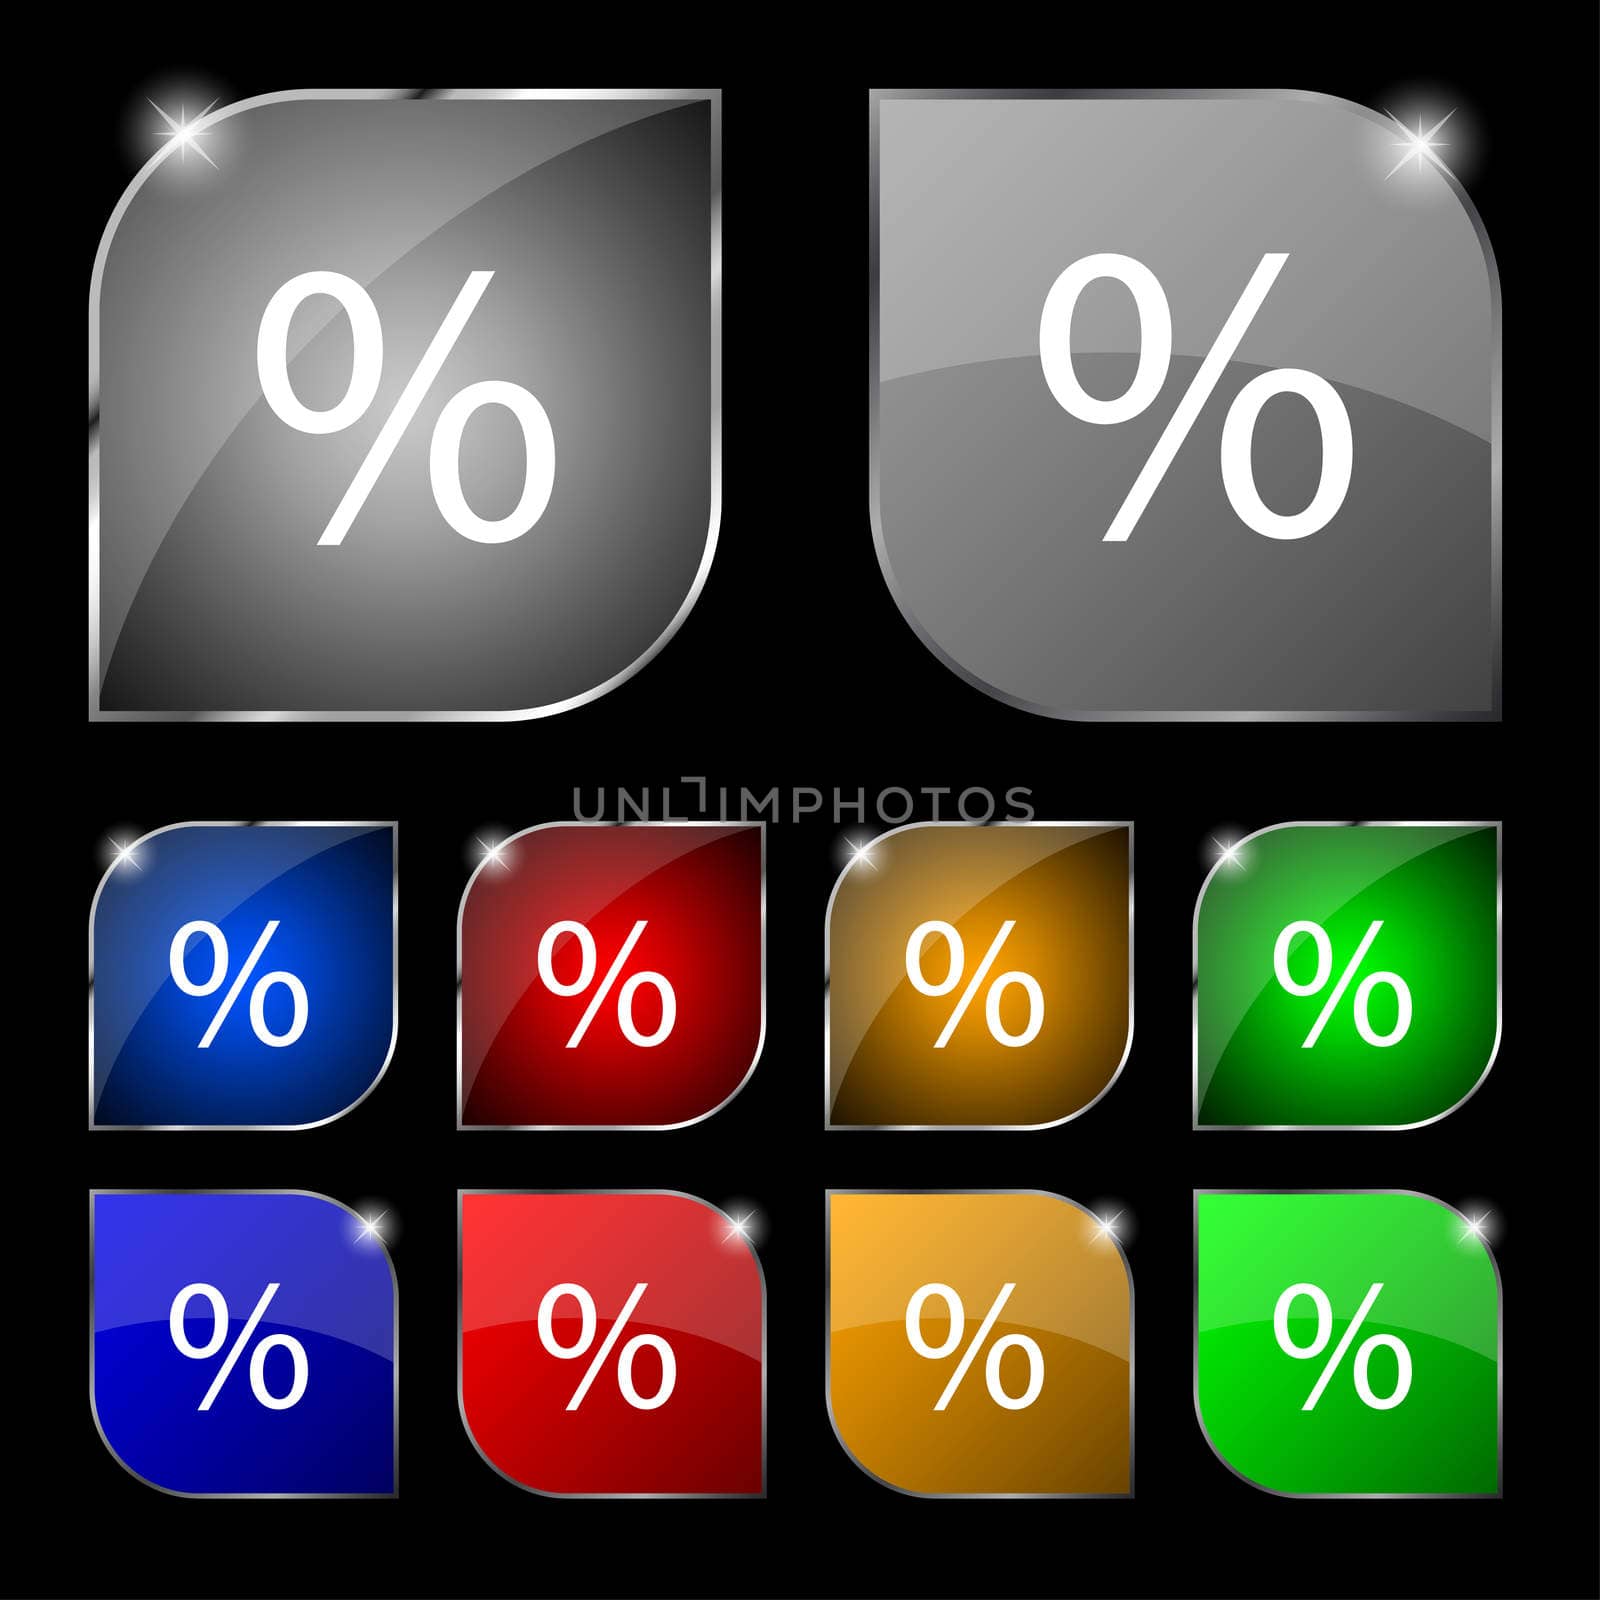 Discount percent sign icon. Modern interface website buttons. Set colourful buttons. illustration